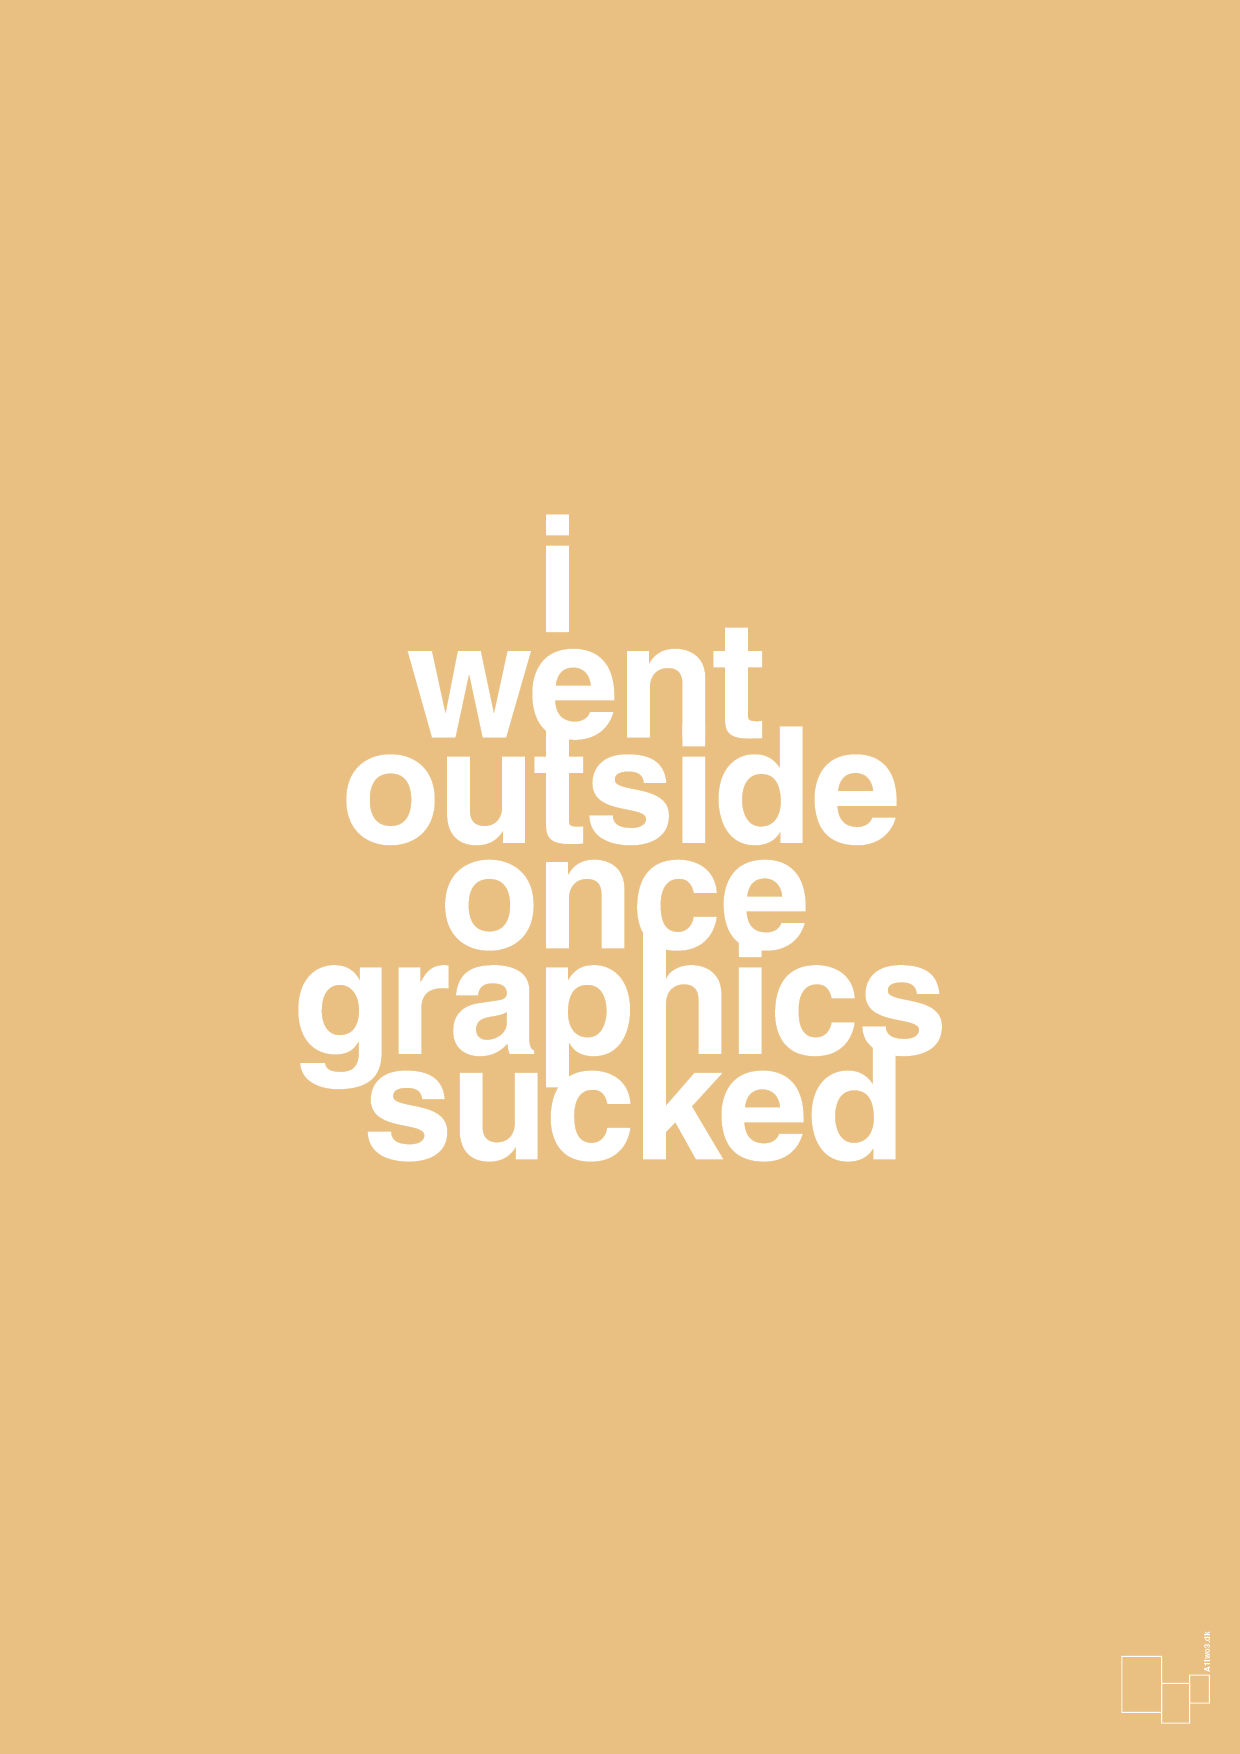 i went outside once graphics sucked - Plakat med Sport & Fritid i Charismatic